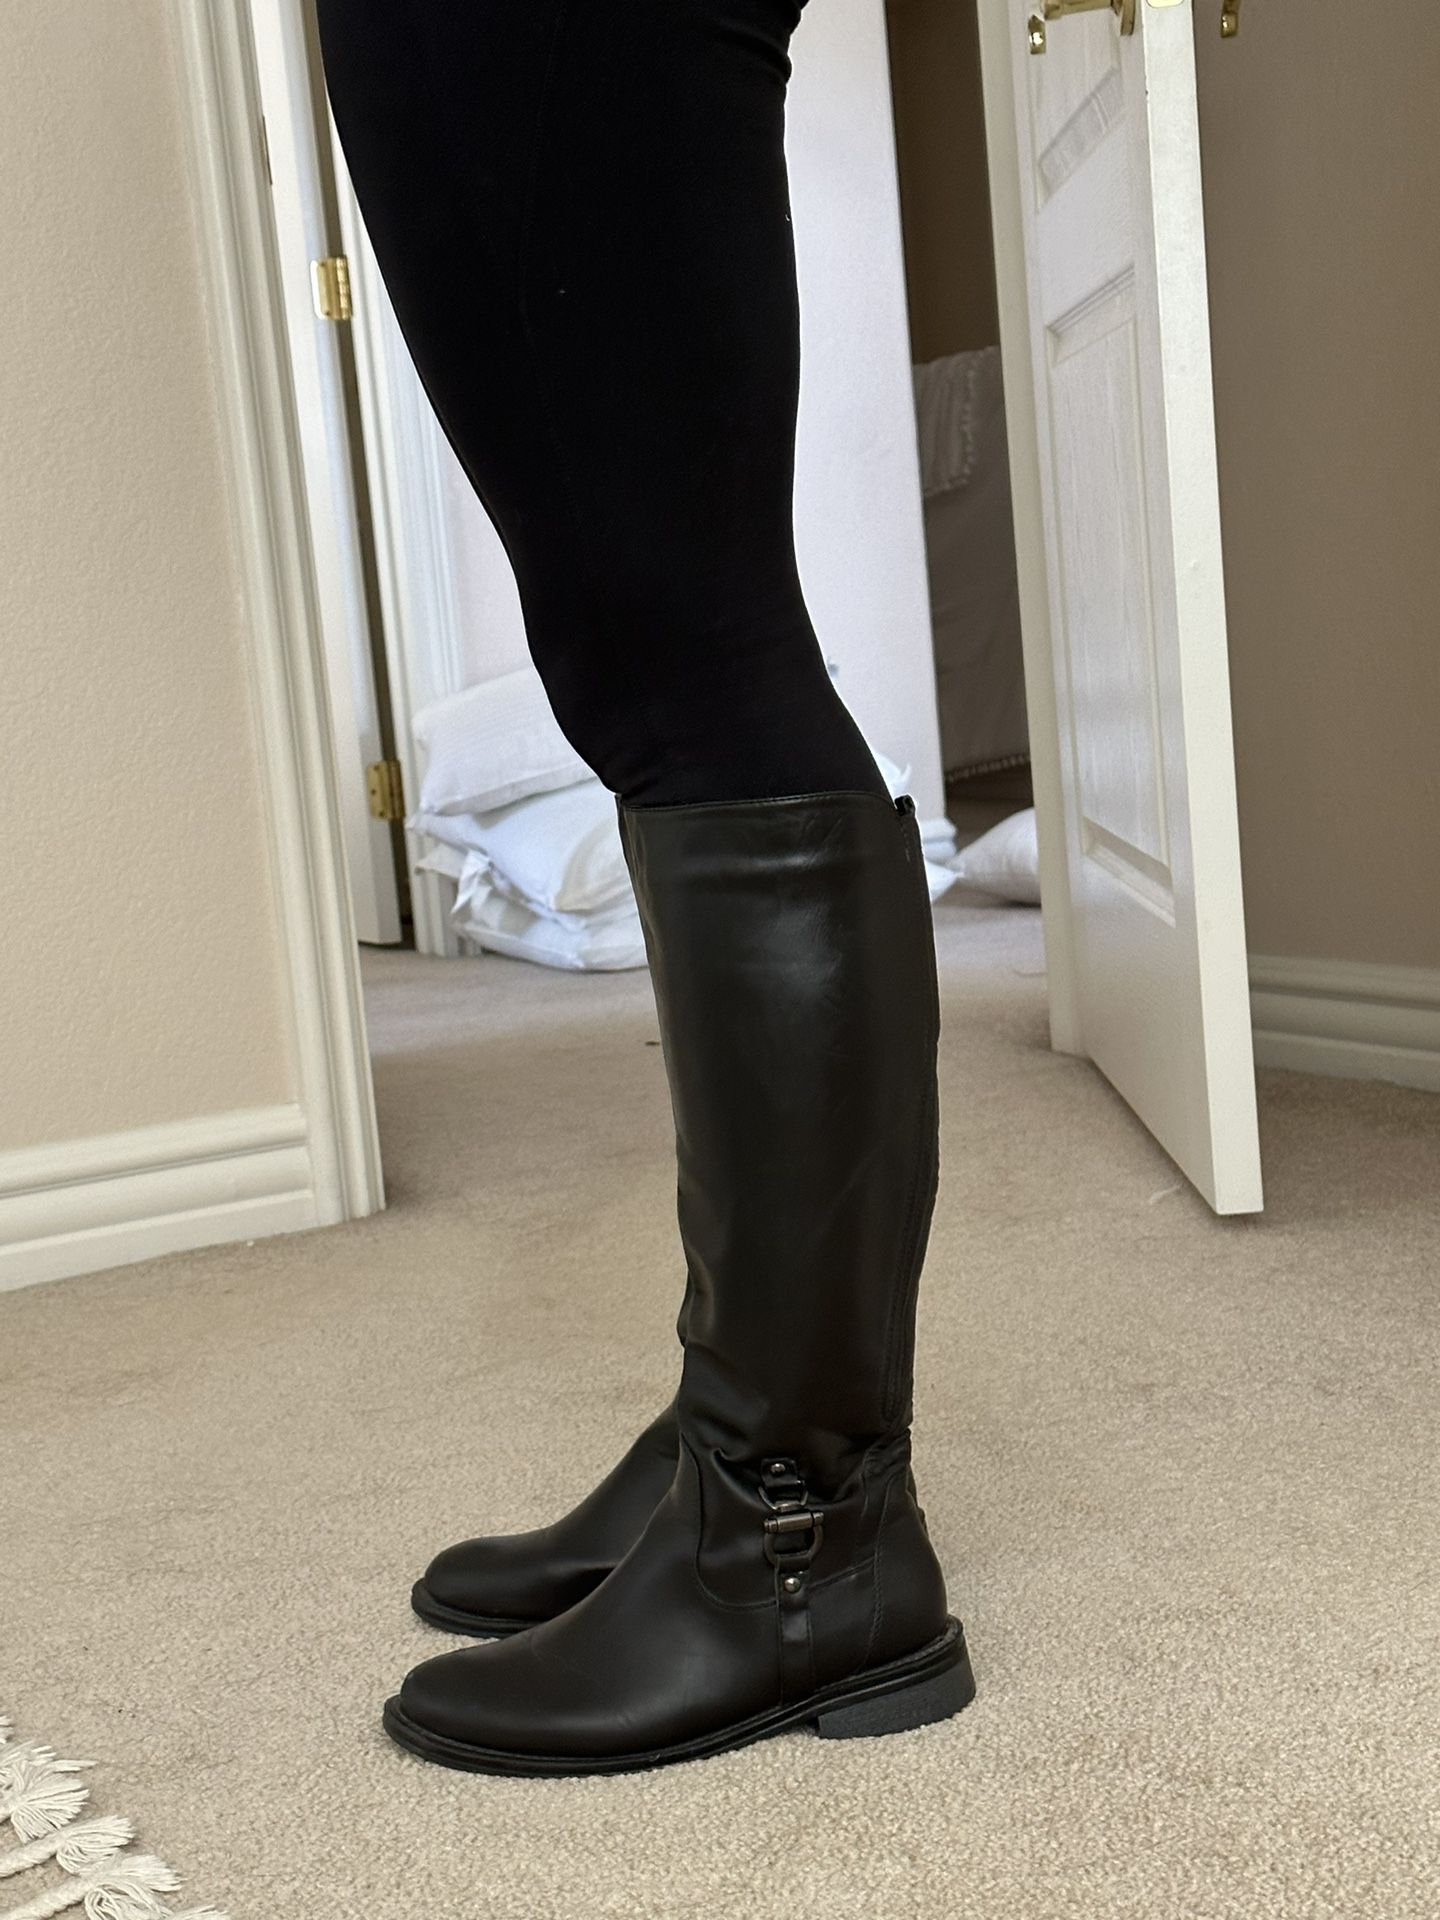 Boots- Black Faux Leather Boots  Size 7.5